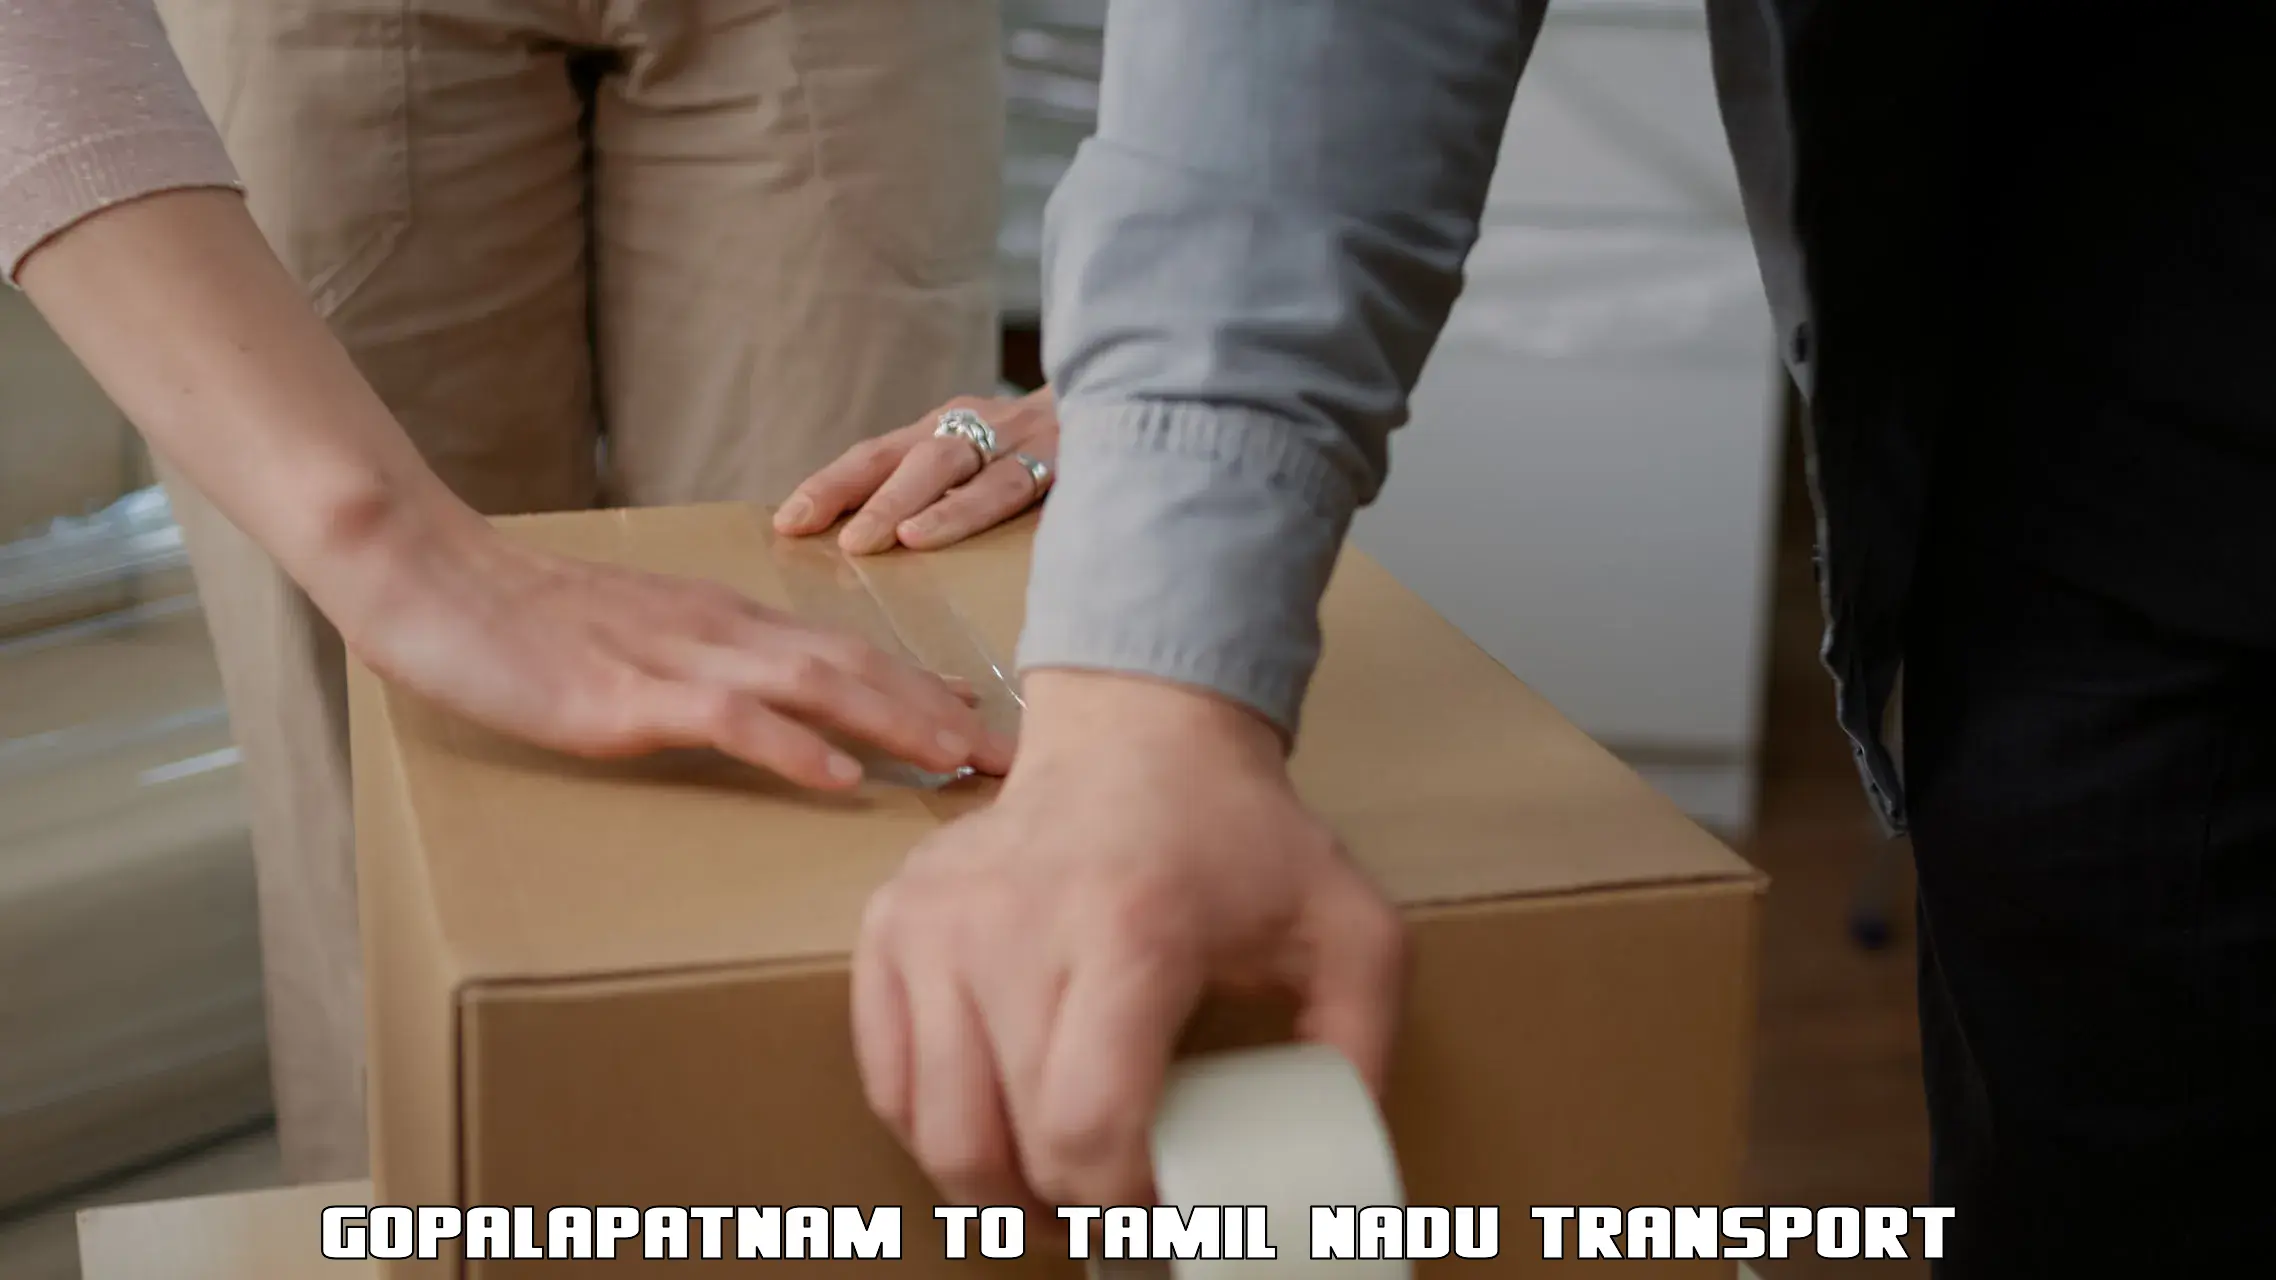 Container transport service Gopalapatnam to Melmaruvathur